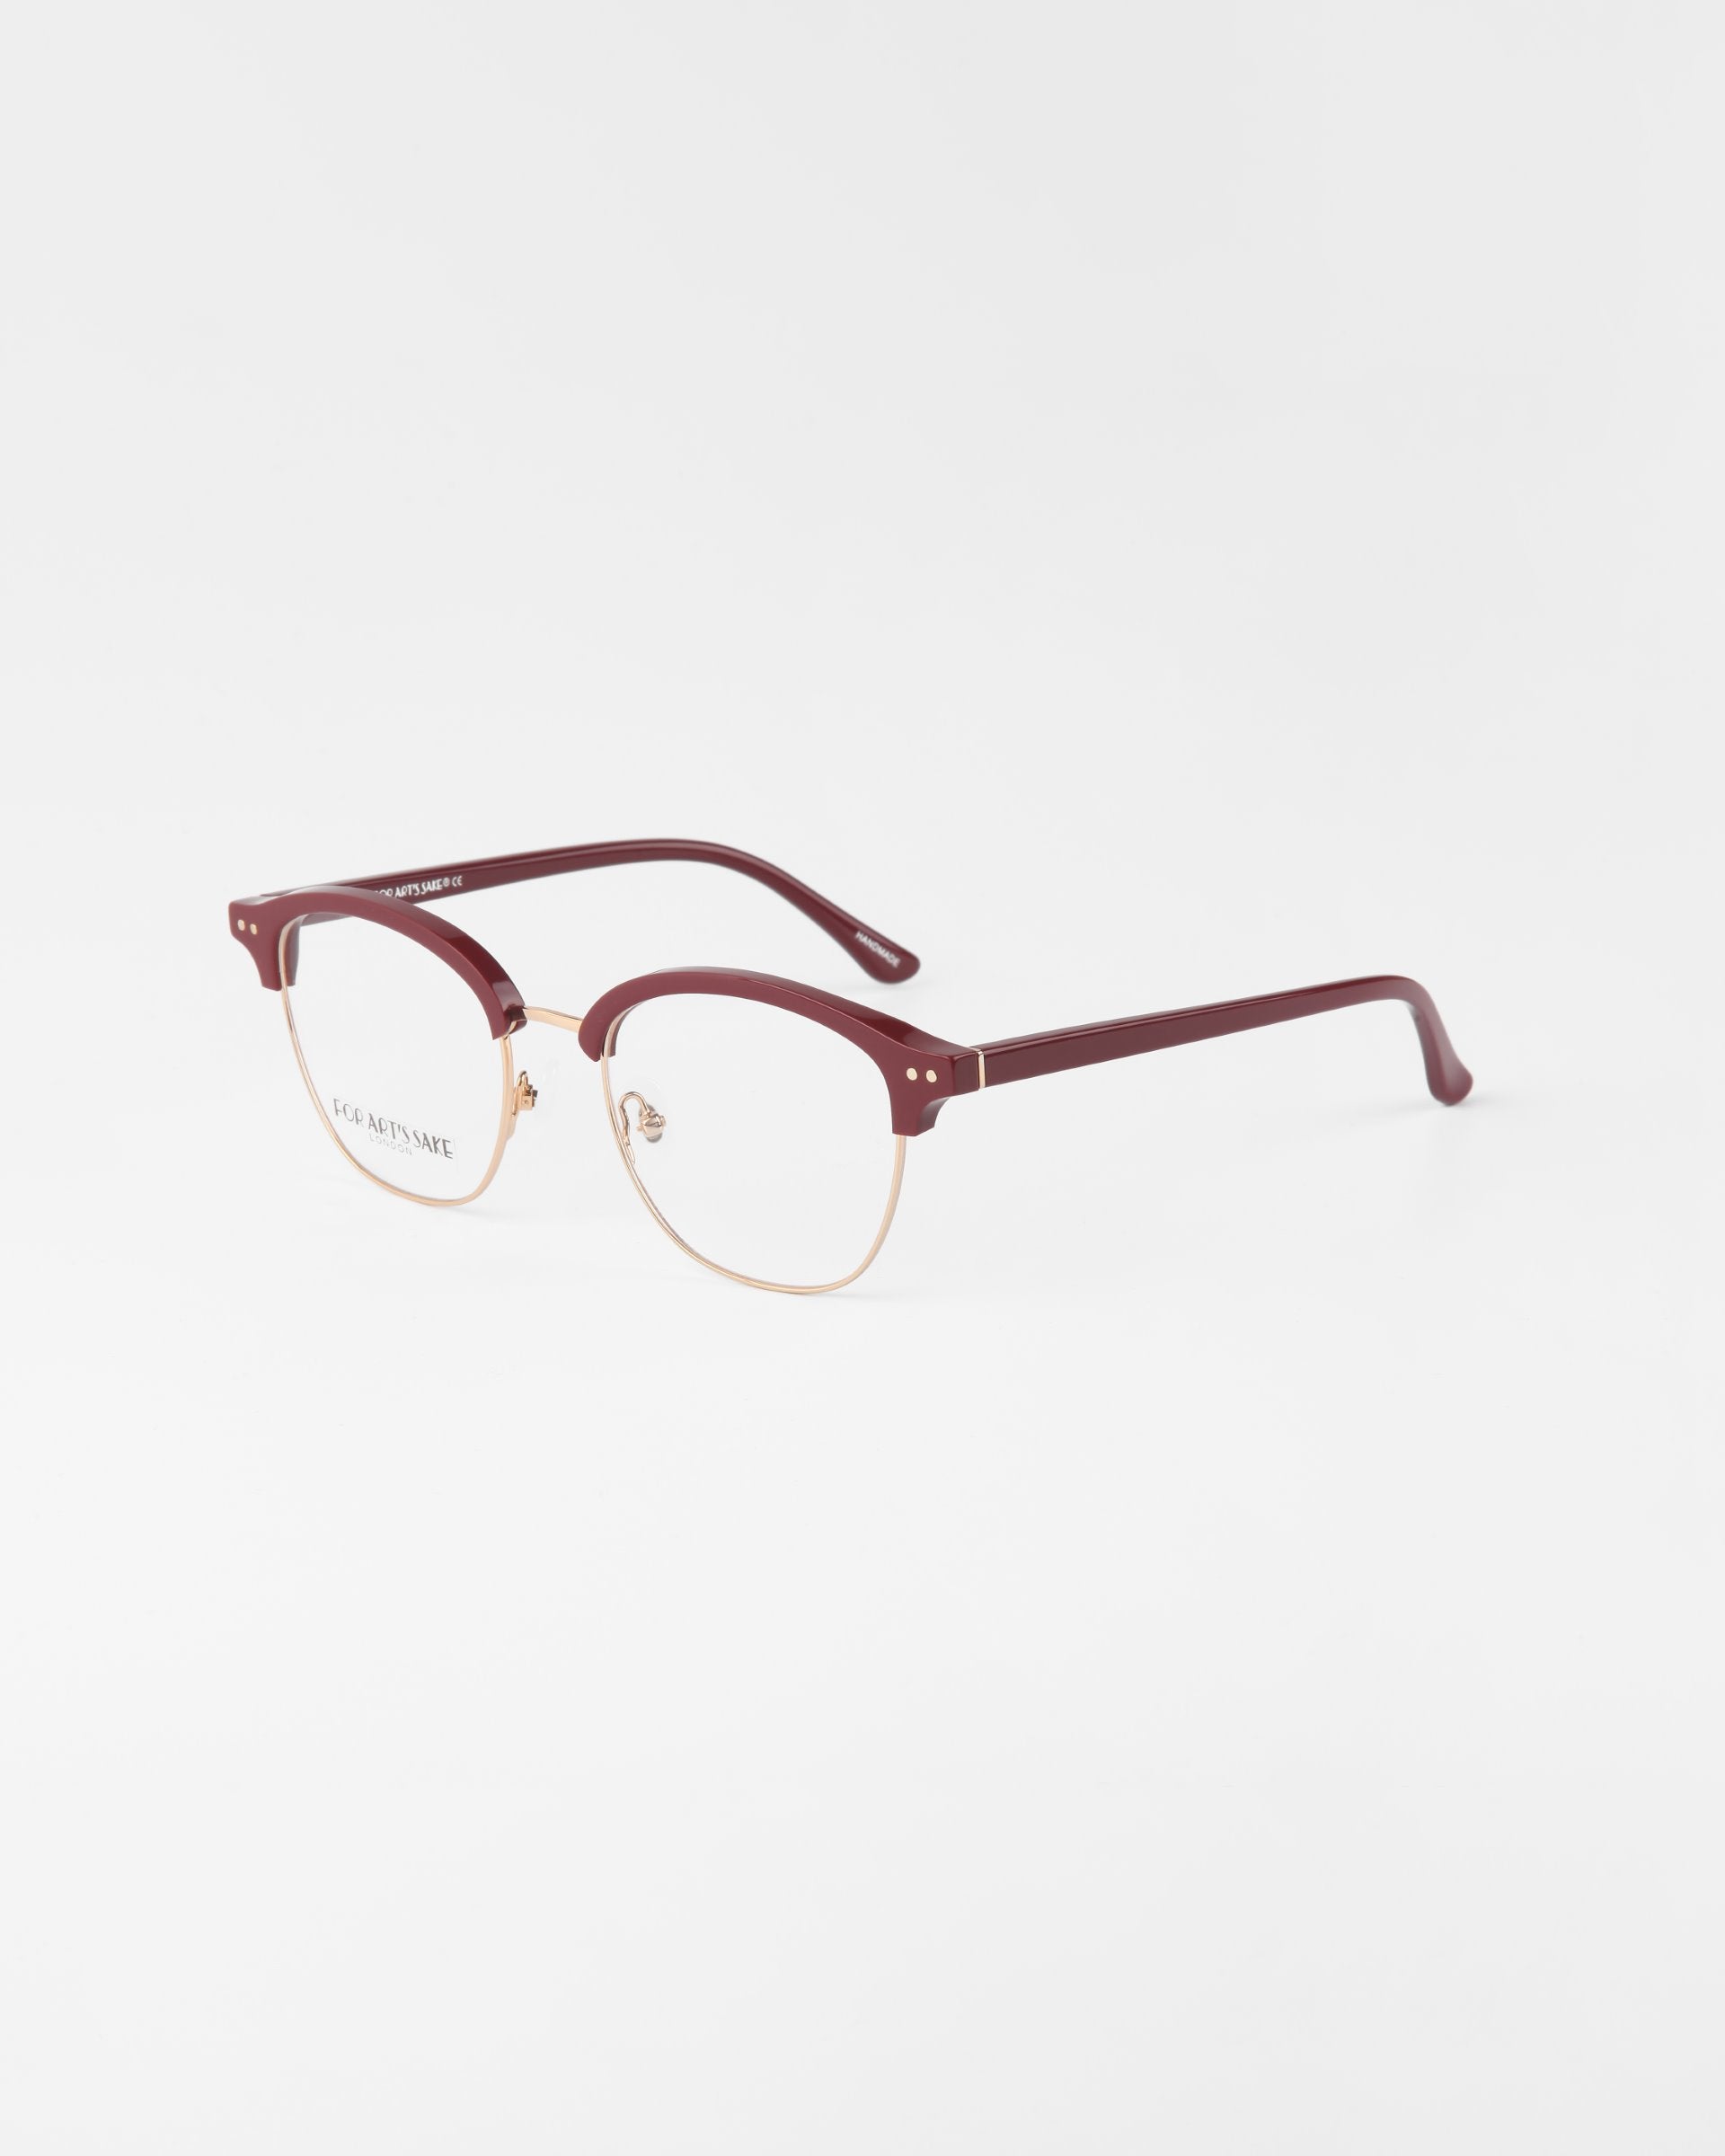 A pair of For Art&#39;s Sake® Painkiller eyeglasses with a gold wireframe and maroon-colored browline and earpieces, placed on a plain white background. The clear lenses include UV protection, enhancing the modern, sophisticated design.